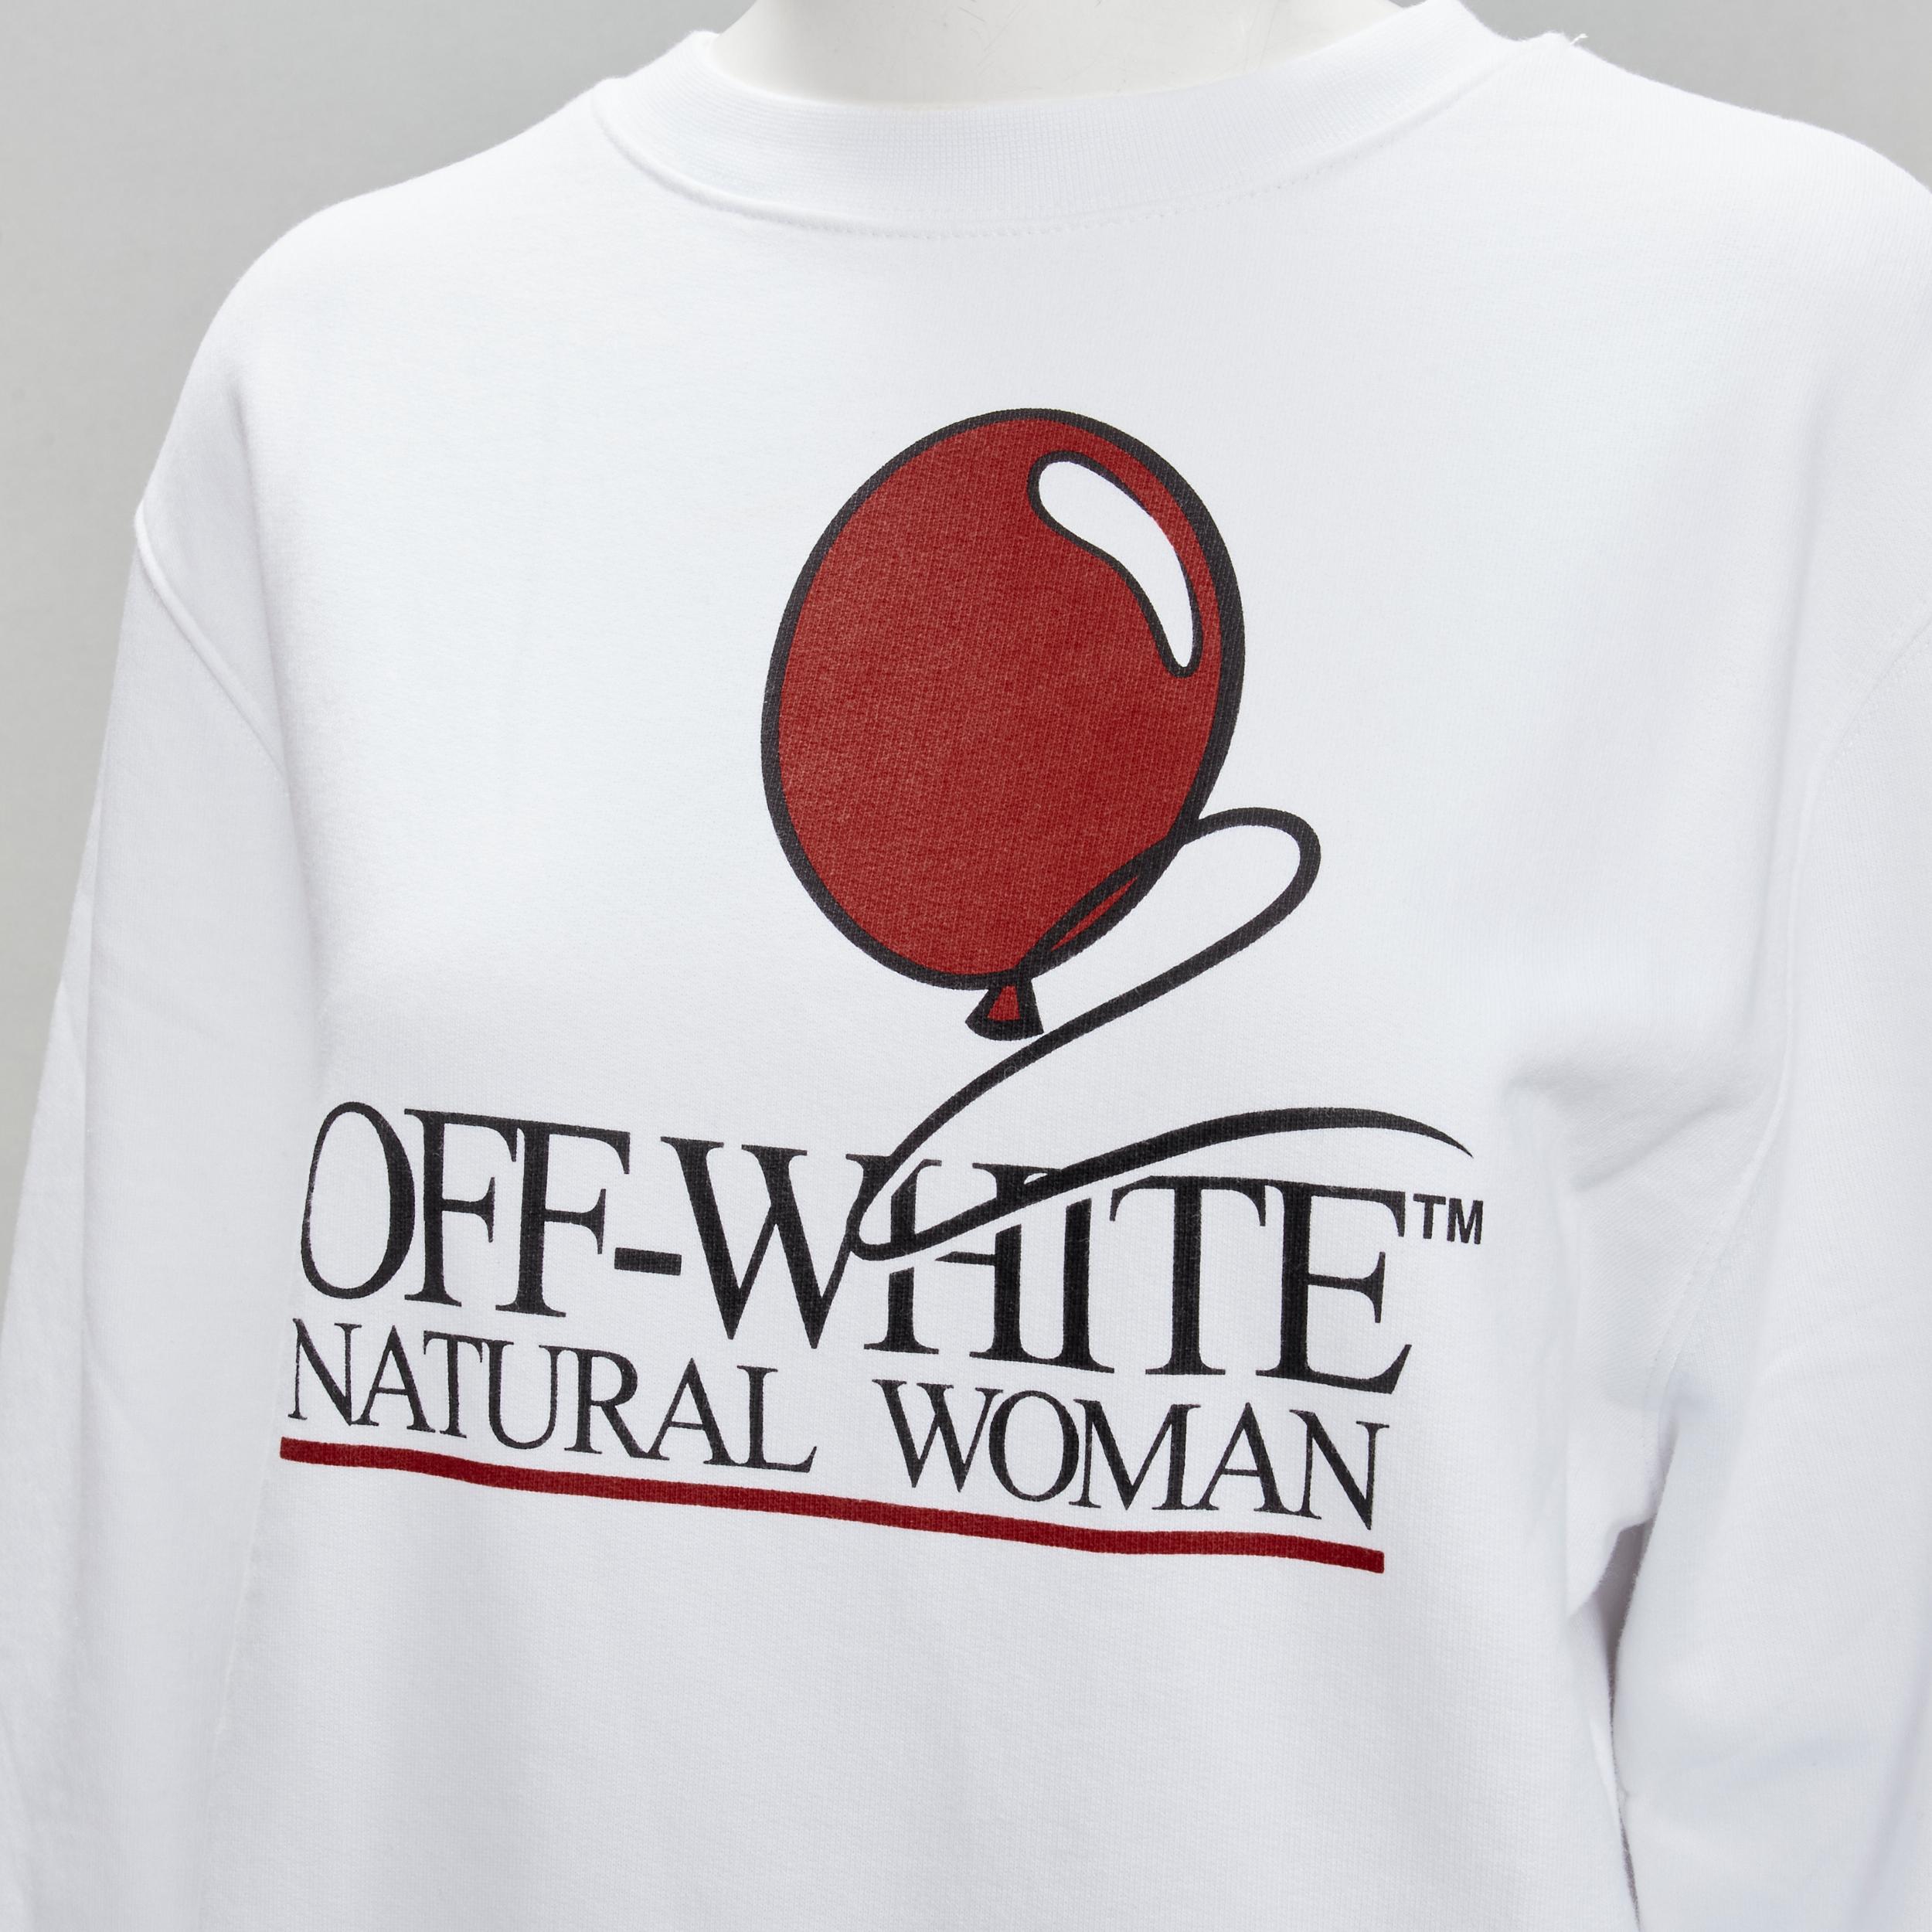 Women's OFF WHITE Virgil Abloh Natural Woman red balloOn print embroidery sweatshirt M